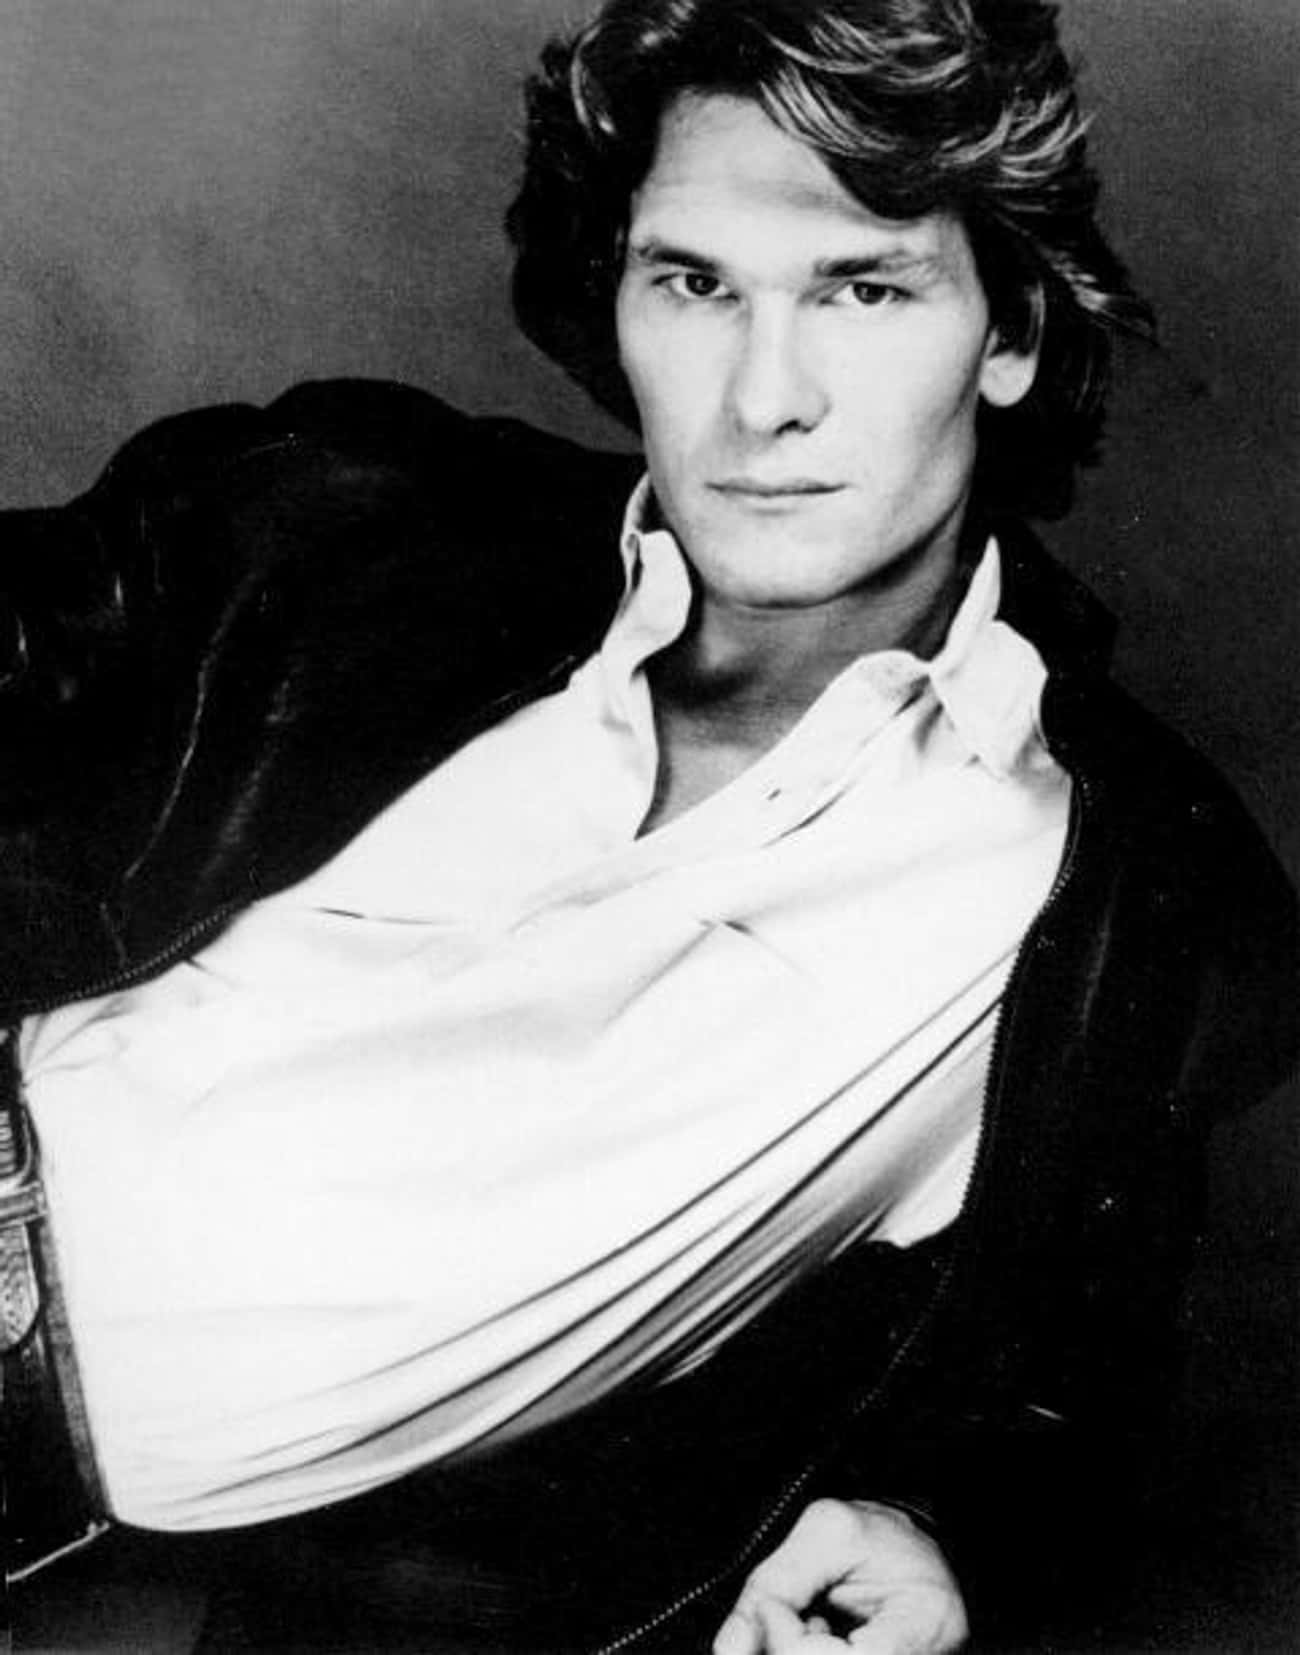 Young Patrick Swayze in Black Jacket and White Shirt